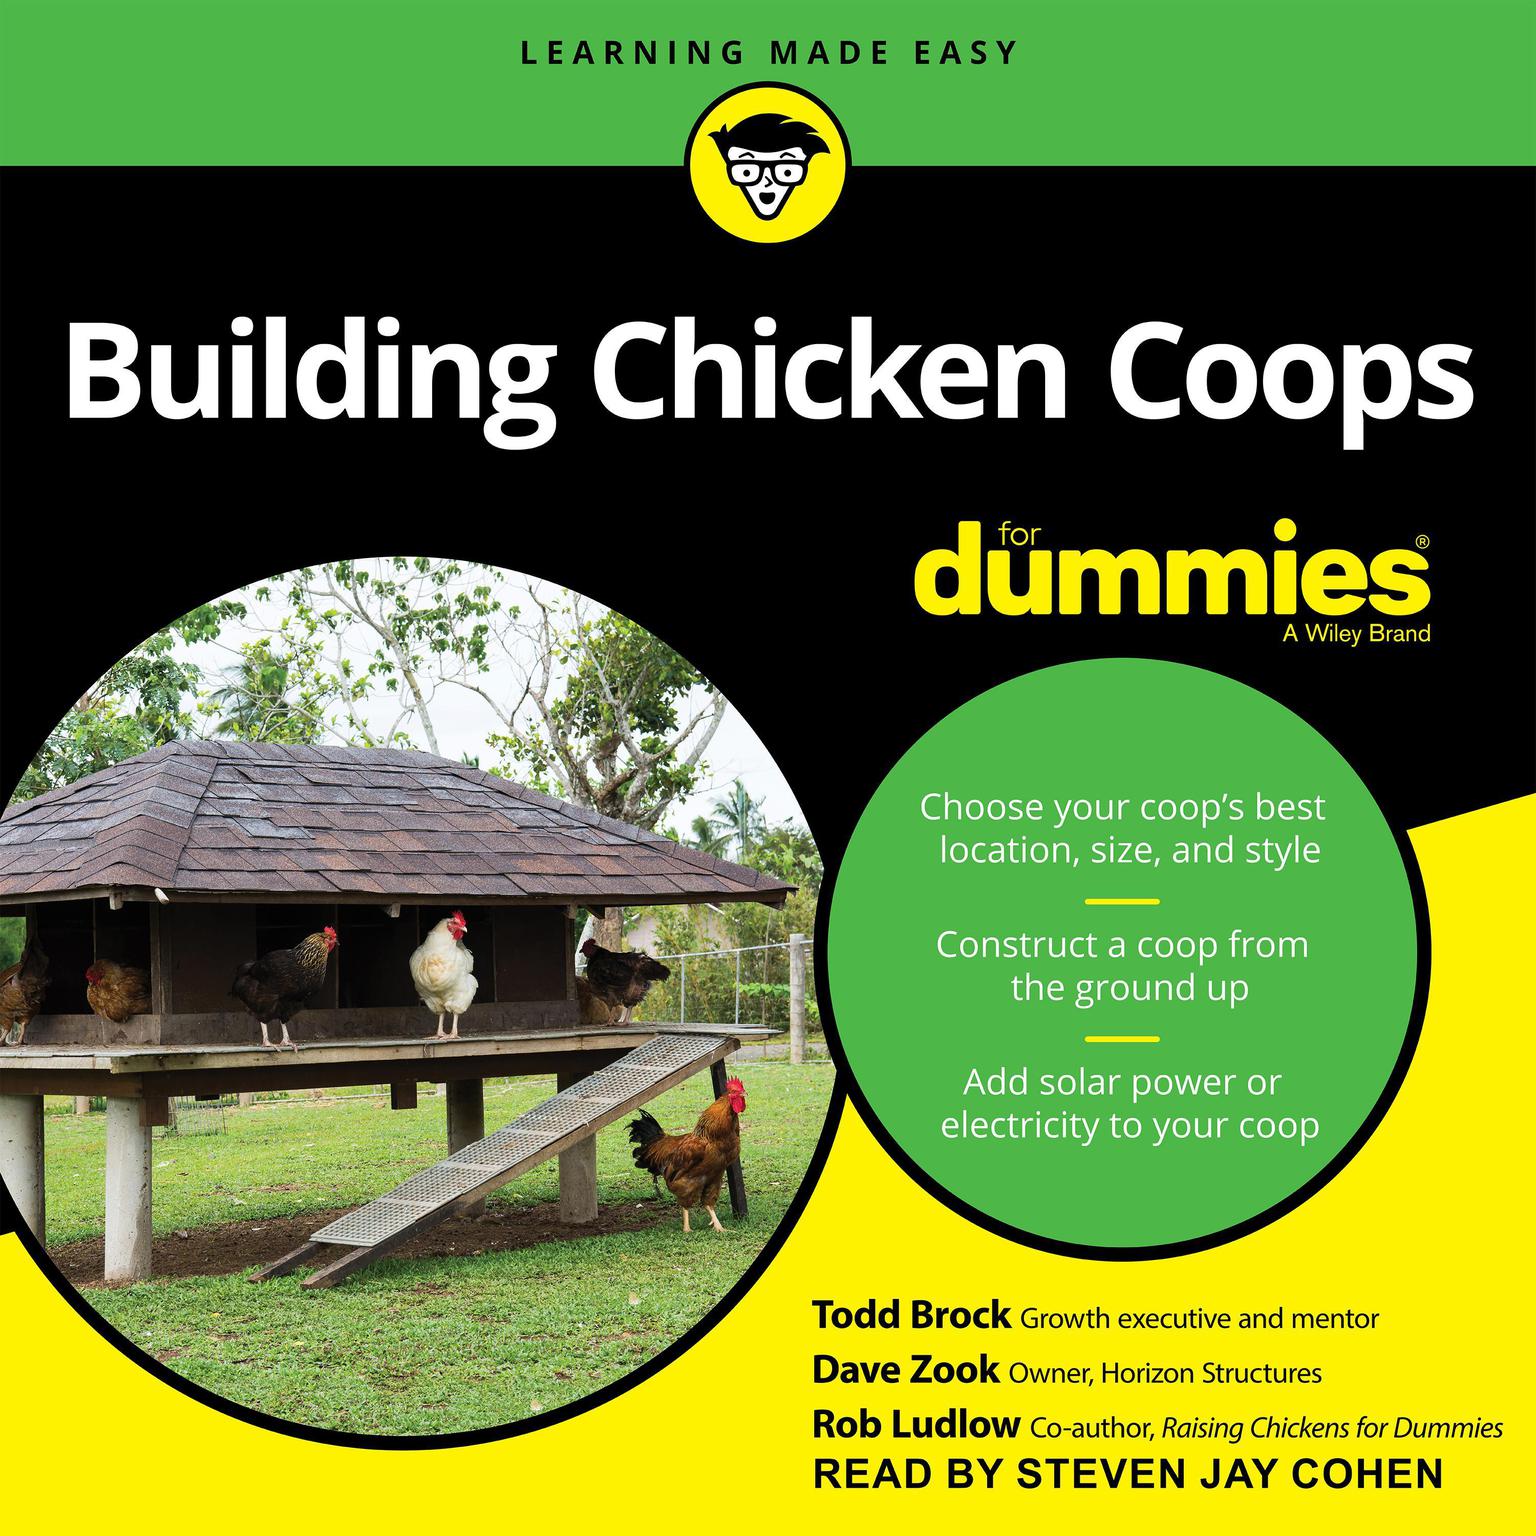 Building Chicken Coops For Dummies Audiobook, by Todd Brock